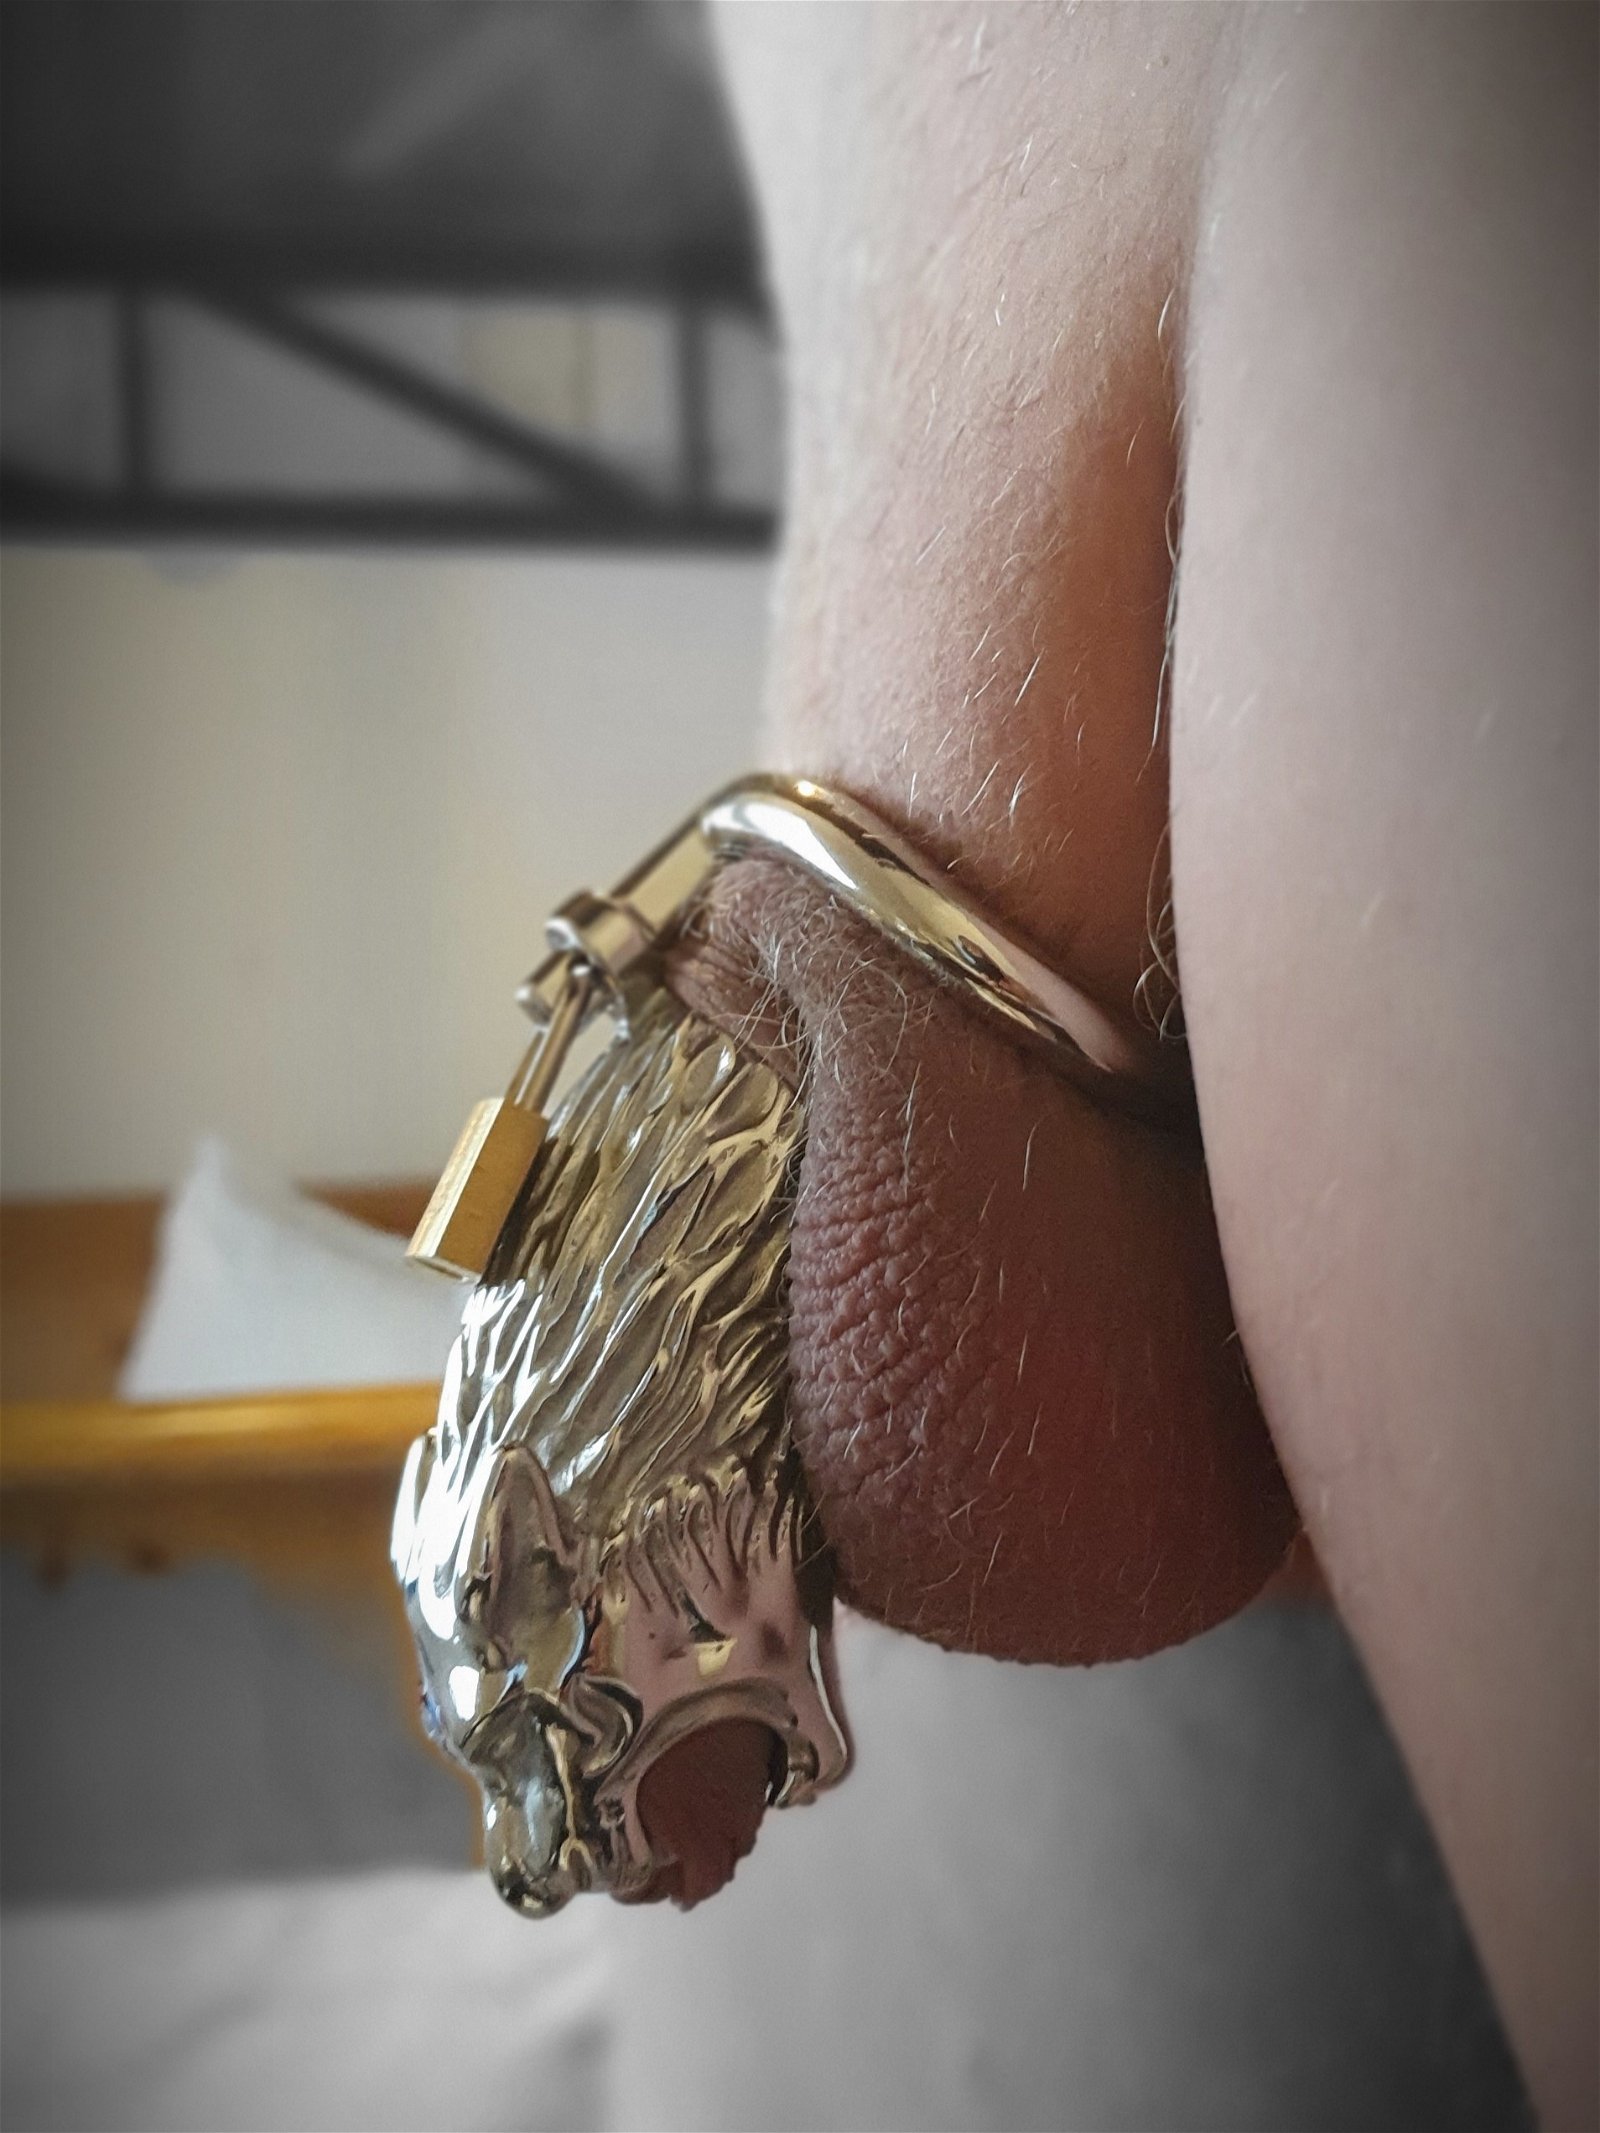 Photo by Crossdresslingerie with the username @Crossdresslingerie, who is a verified user,  April 30, 2019 at 10:27 PM. The post is about the topic Male Chastity and the text says 'My wife bought me a new chastity device, game of thrones-style today 😊'